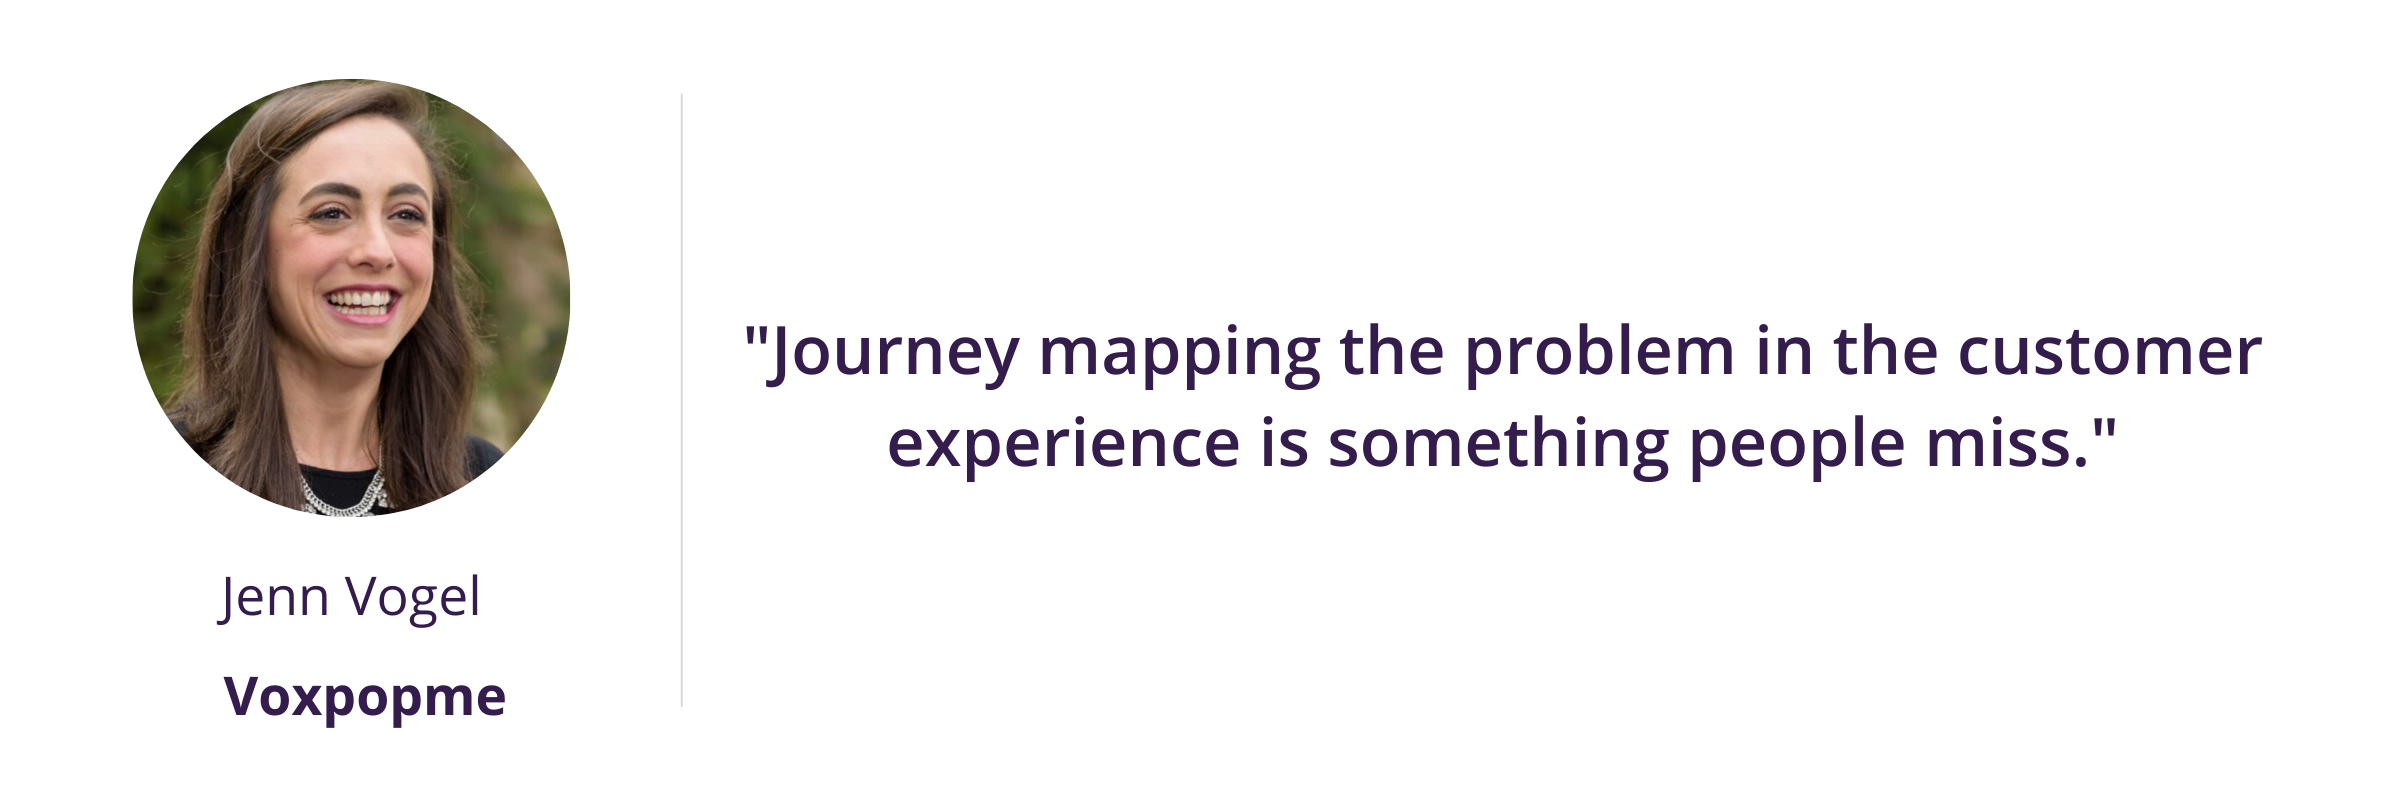 "Journey mapping the problem in the customer experience is something people miss."